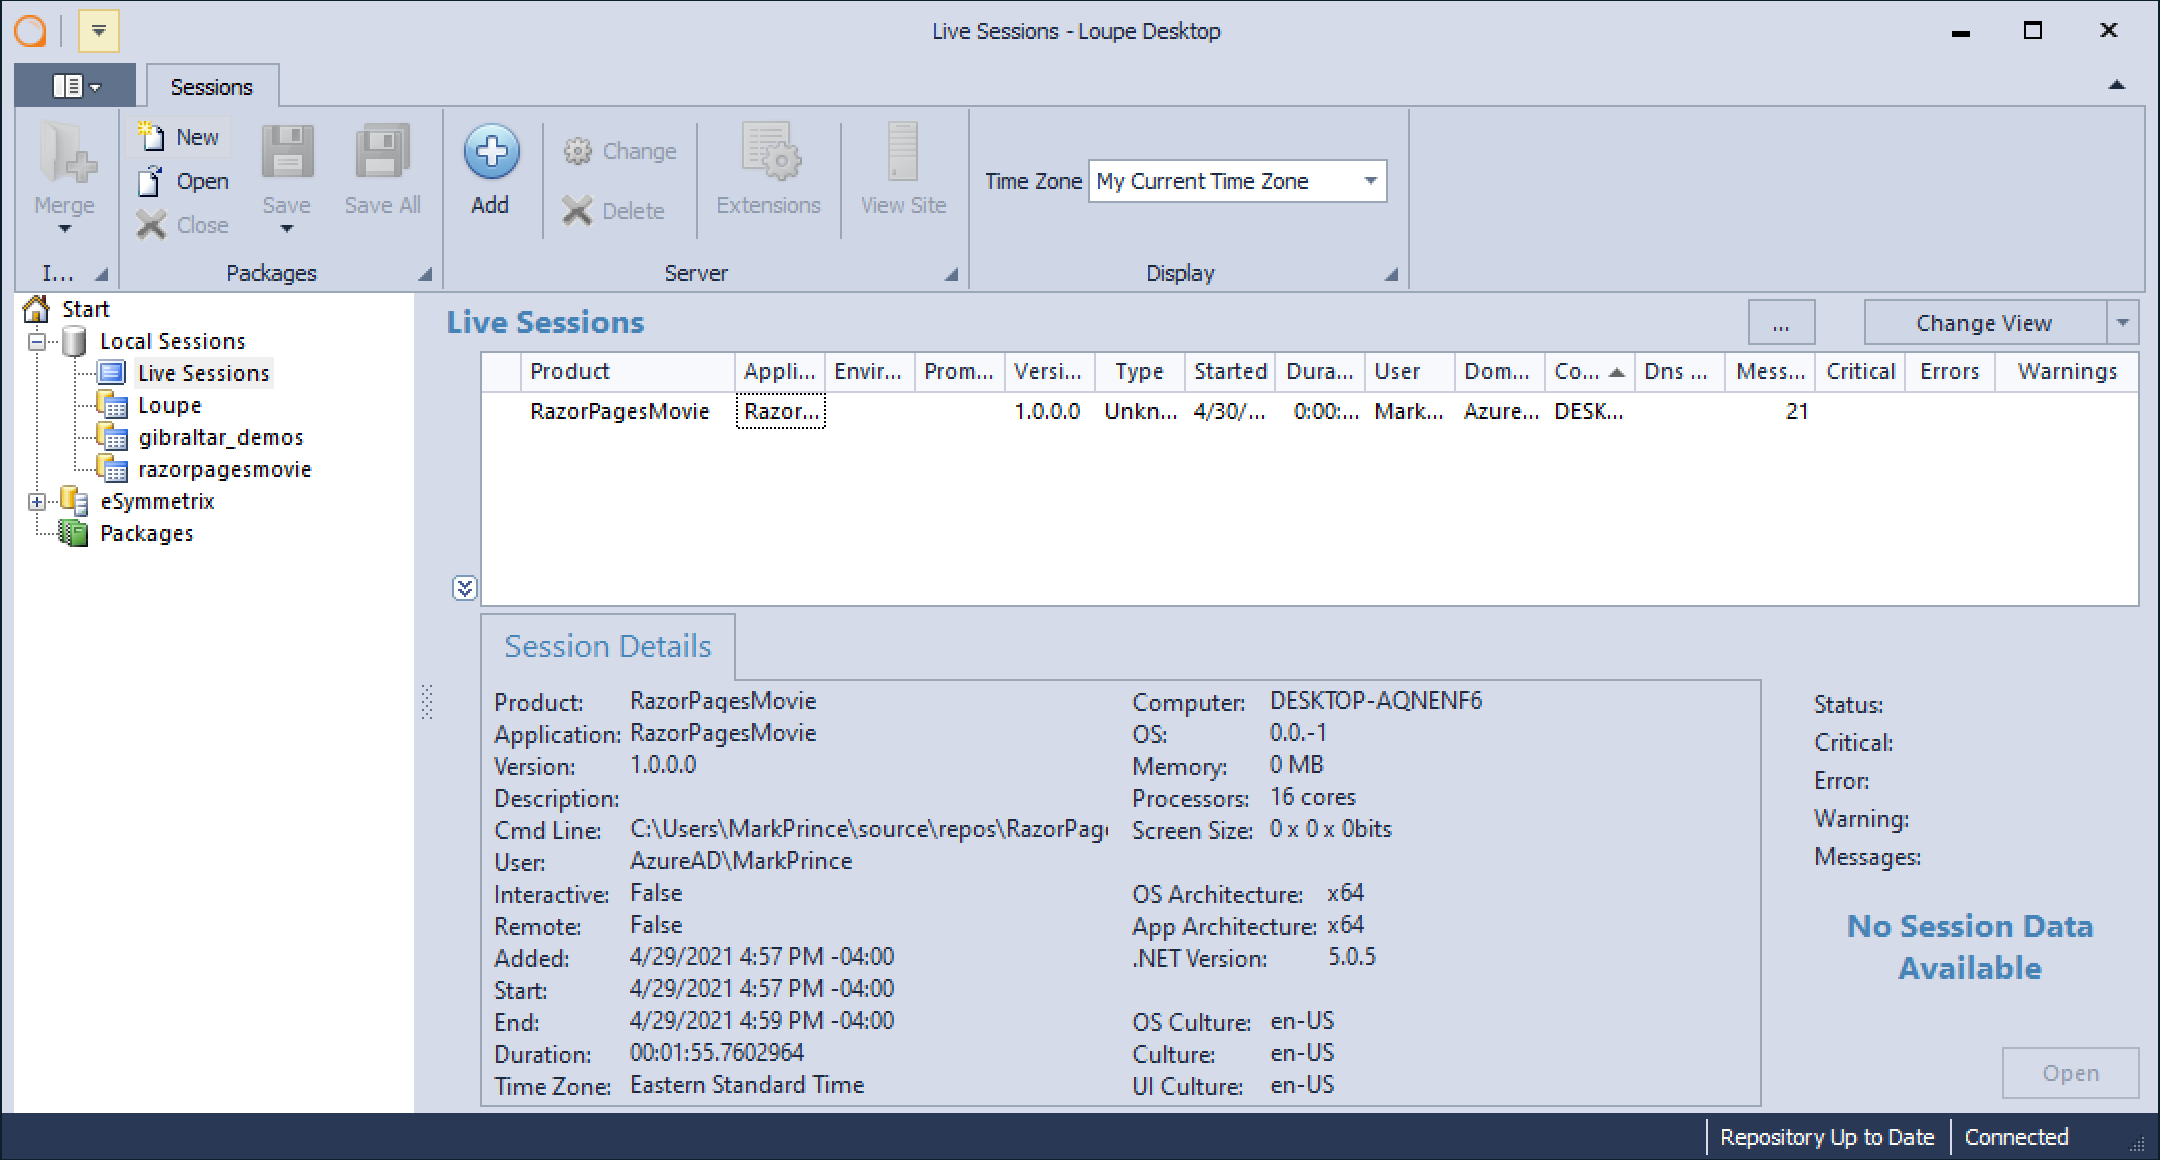 Screenshot of Loupe Desktop Local Sessions Live Sessions menu with a RazorPAgesMovie application session available to view.